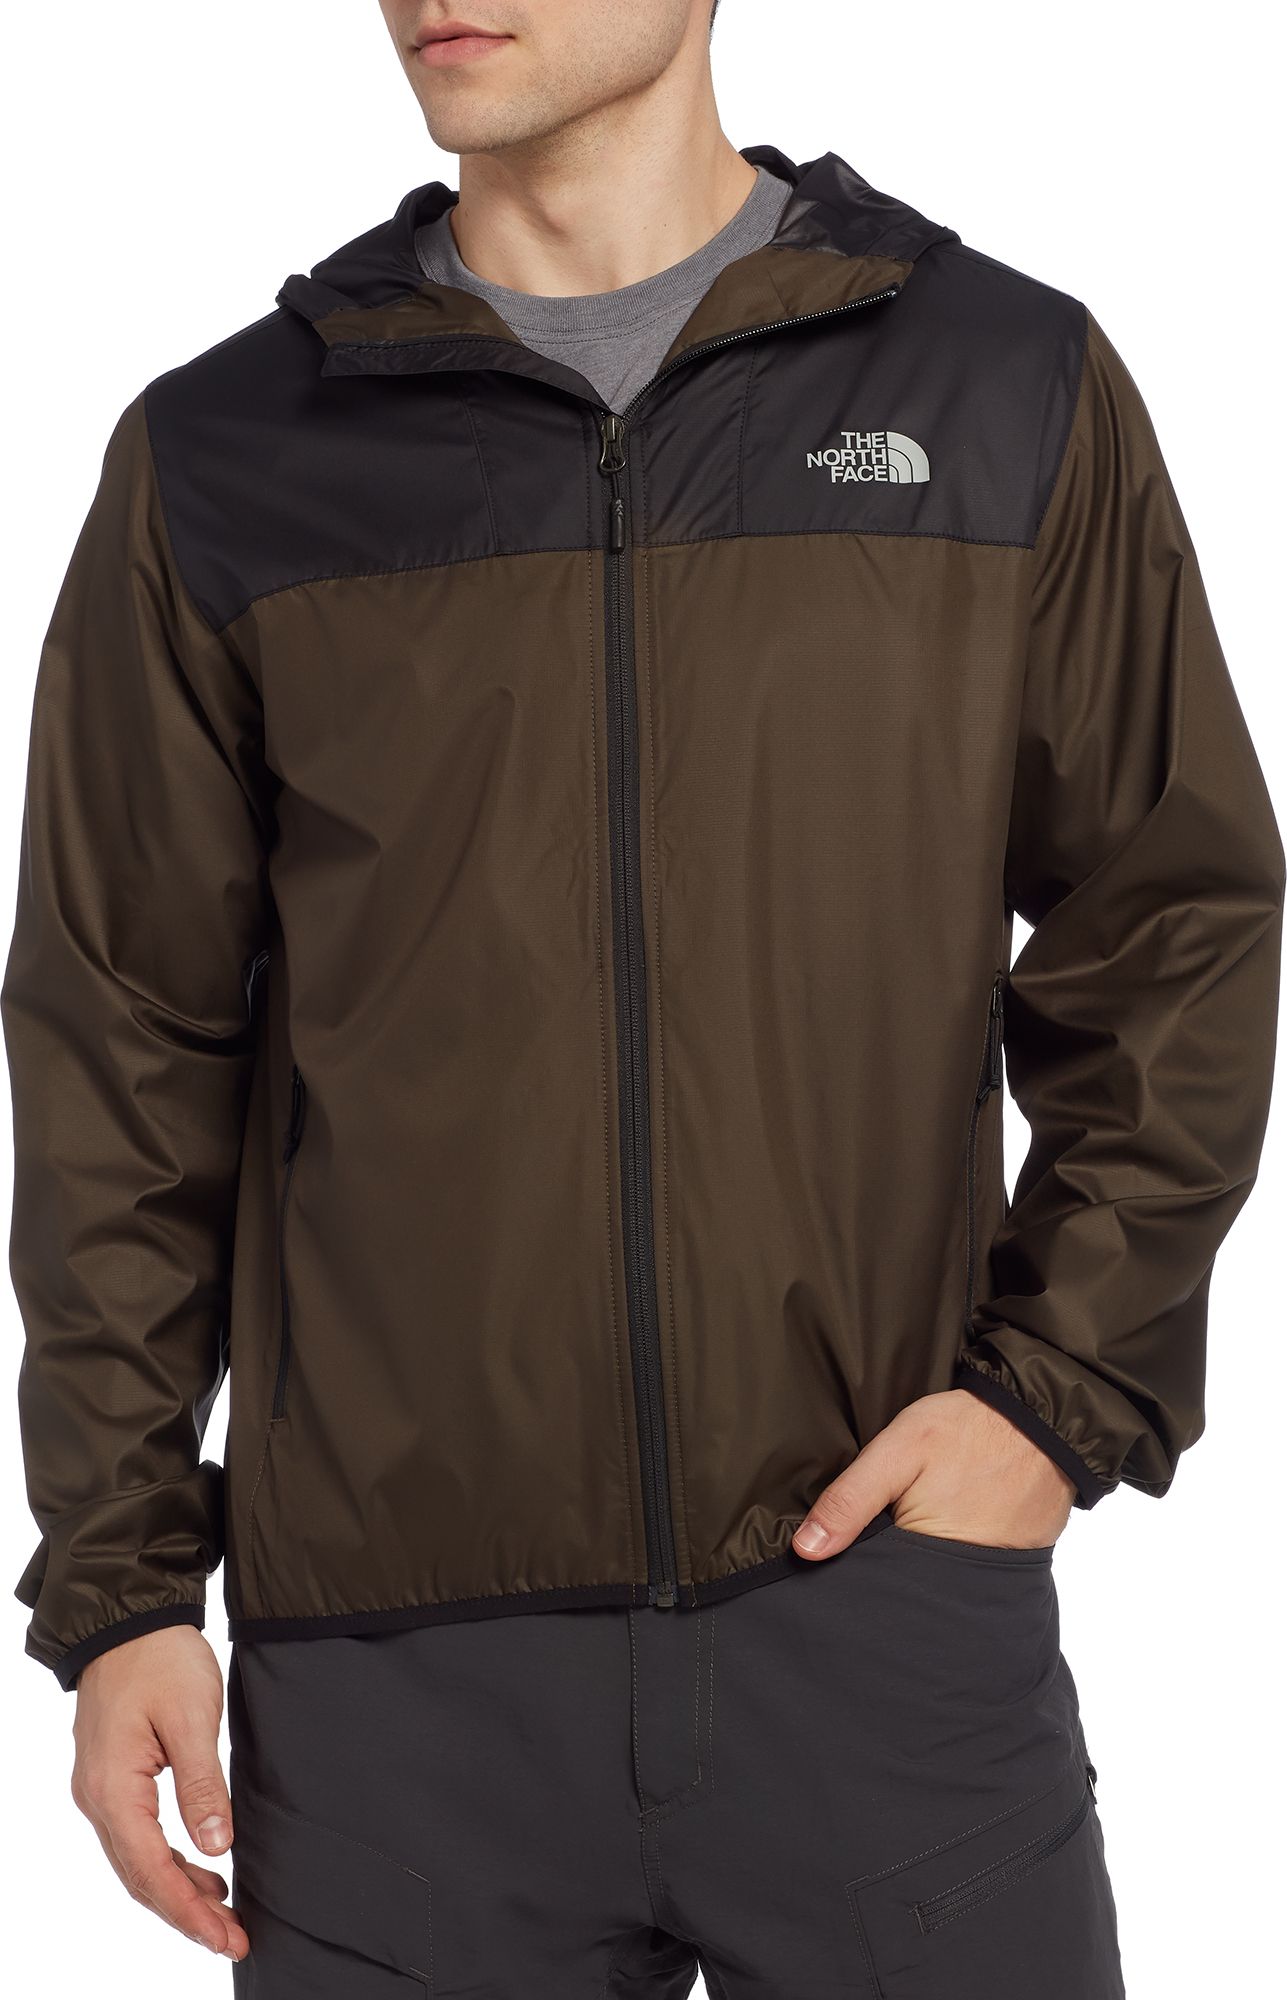 The North Face Men's Cyclone 2 Hooded Jacket - .97